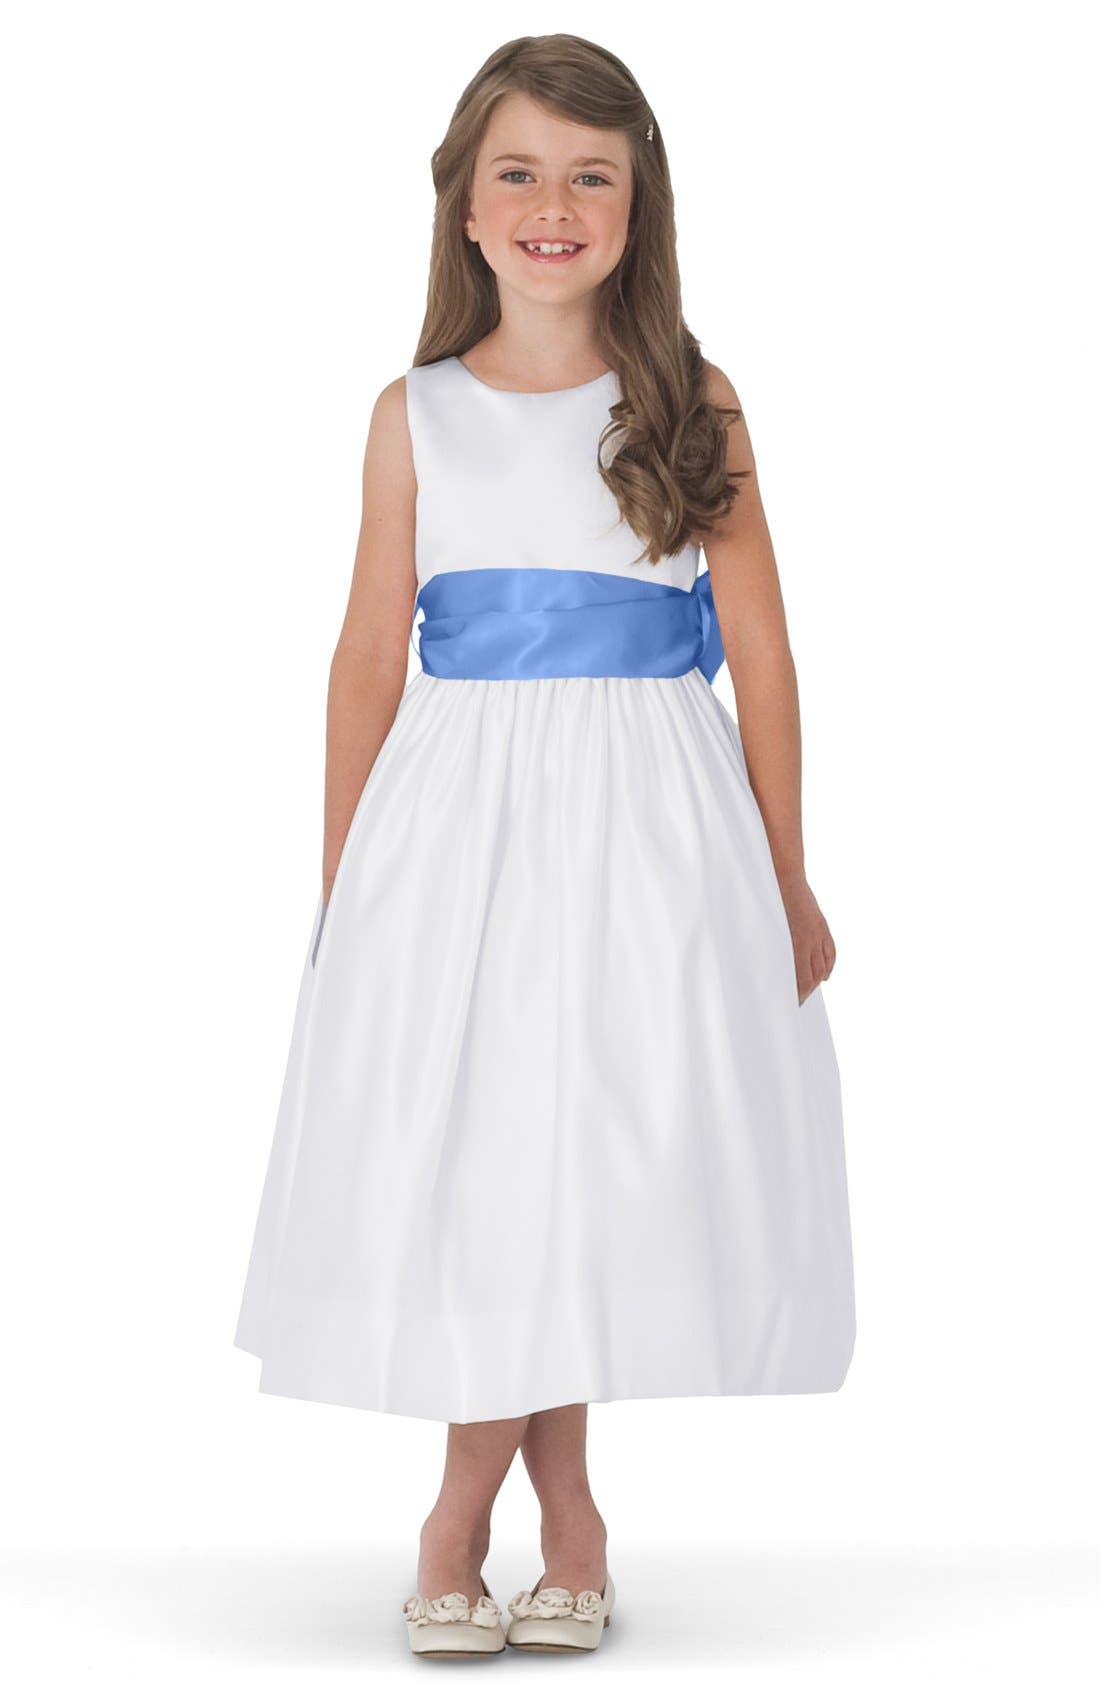 Pics Of Girls Dress | Seven New Thoughts About Pics Of Girls Dress That ...